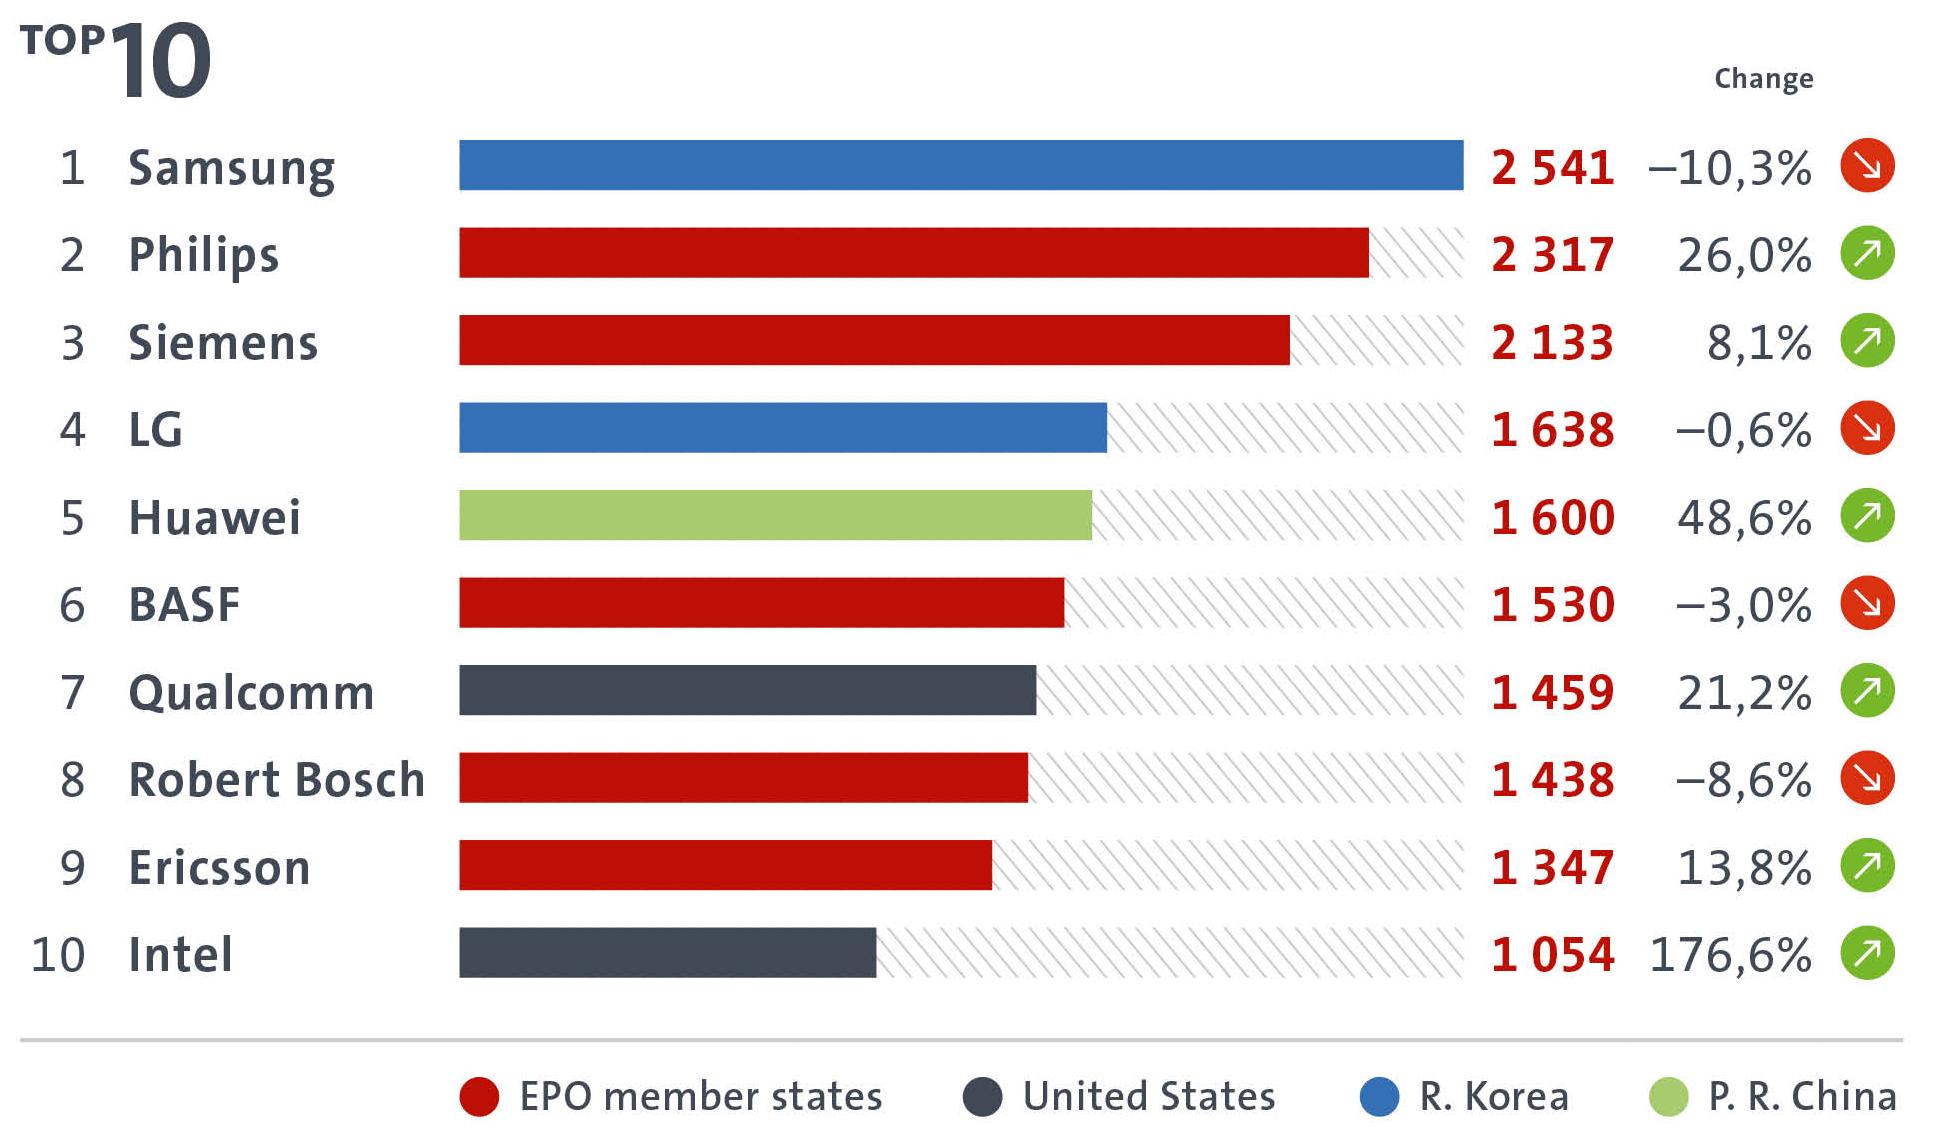 Top applicants seeking patent protection from the EPO in 2014 Analysis based on European patent applications filed with